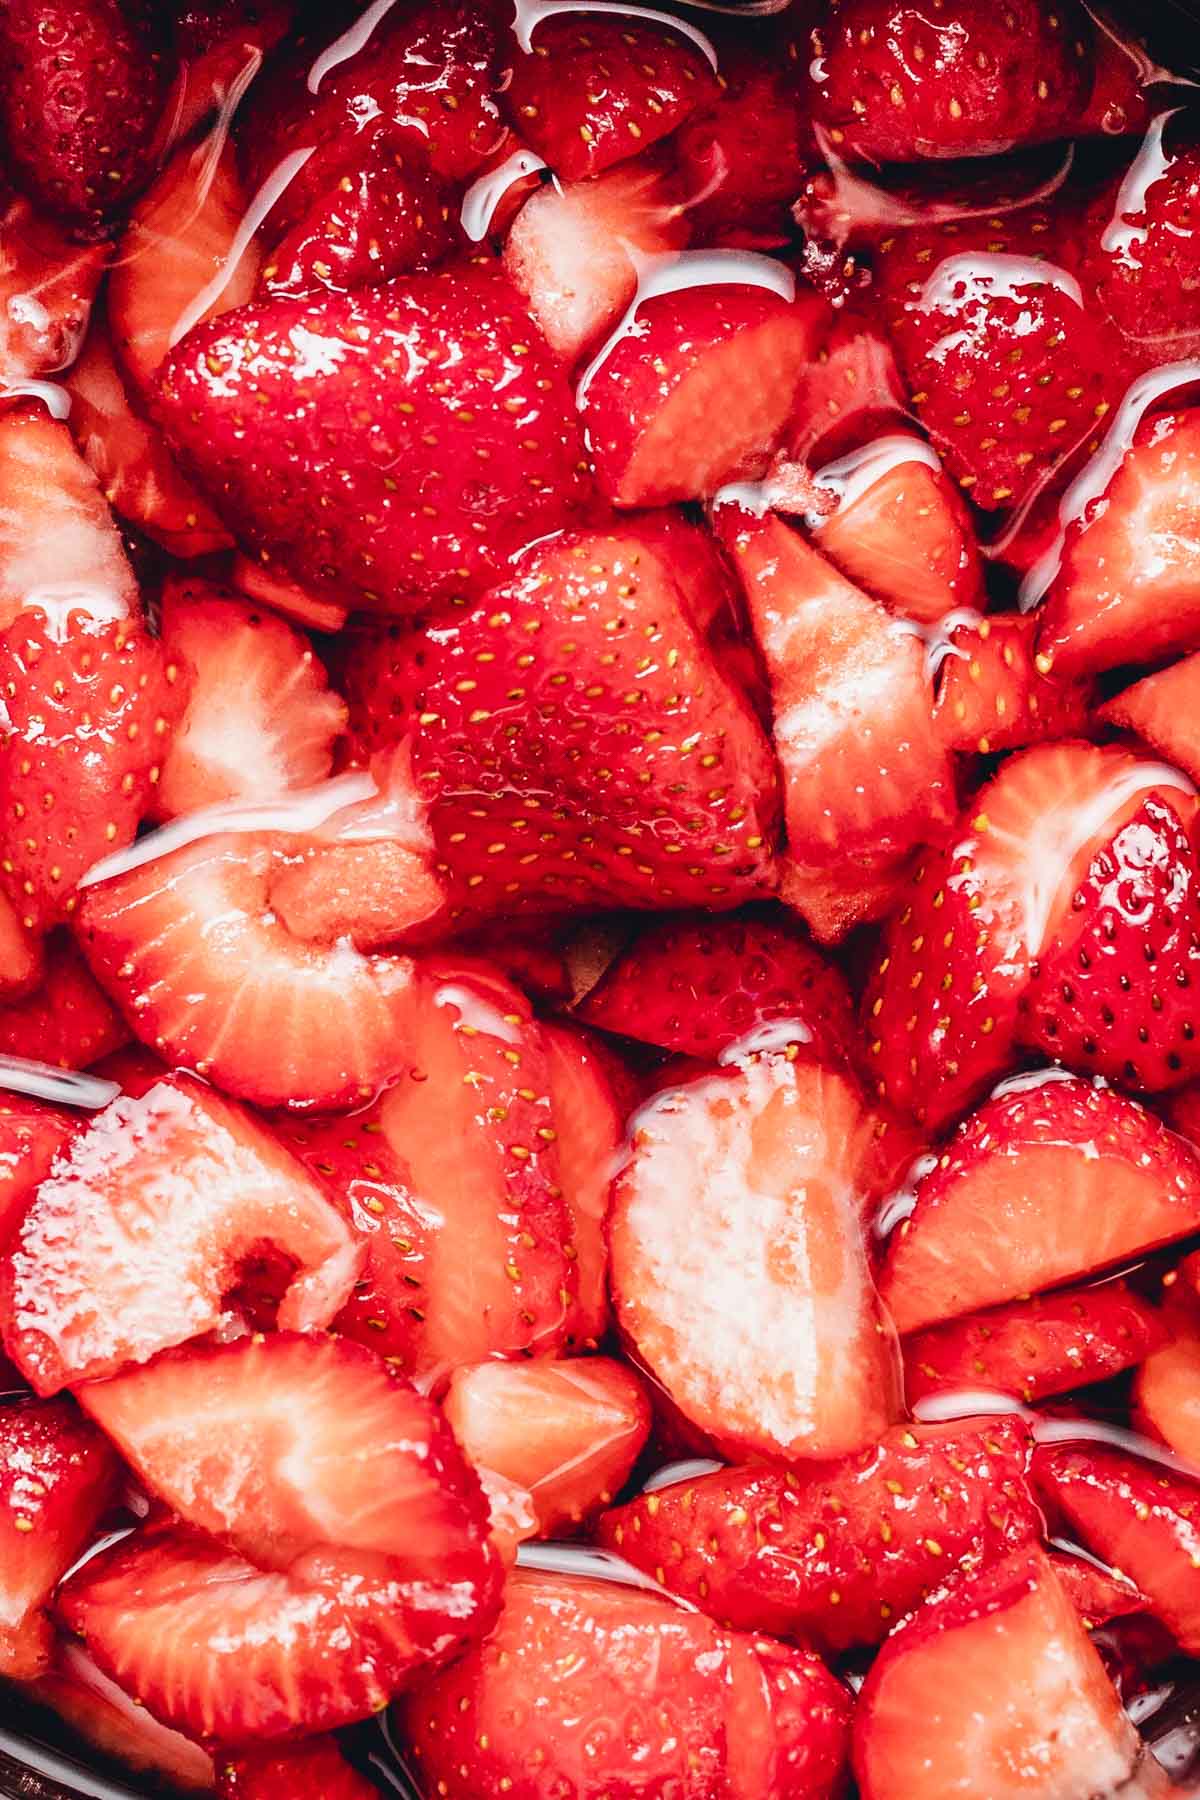 A close-up image of sliced strawberries in water.